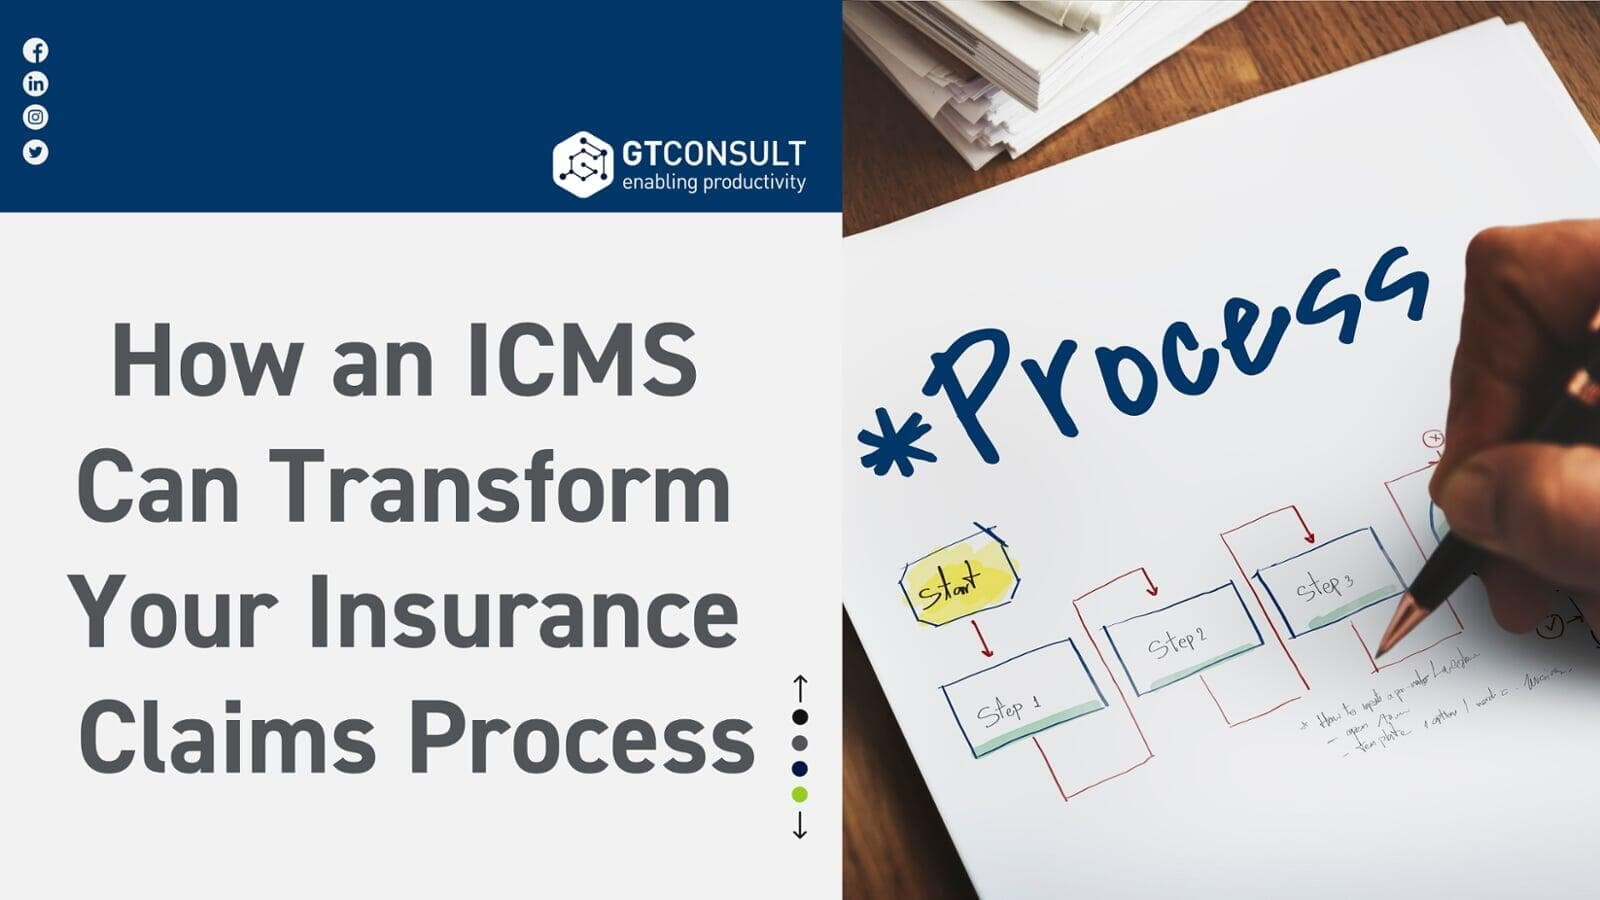 How an ICMS Can Transform Your Insurance Claims Process